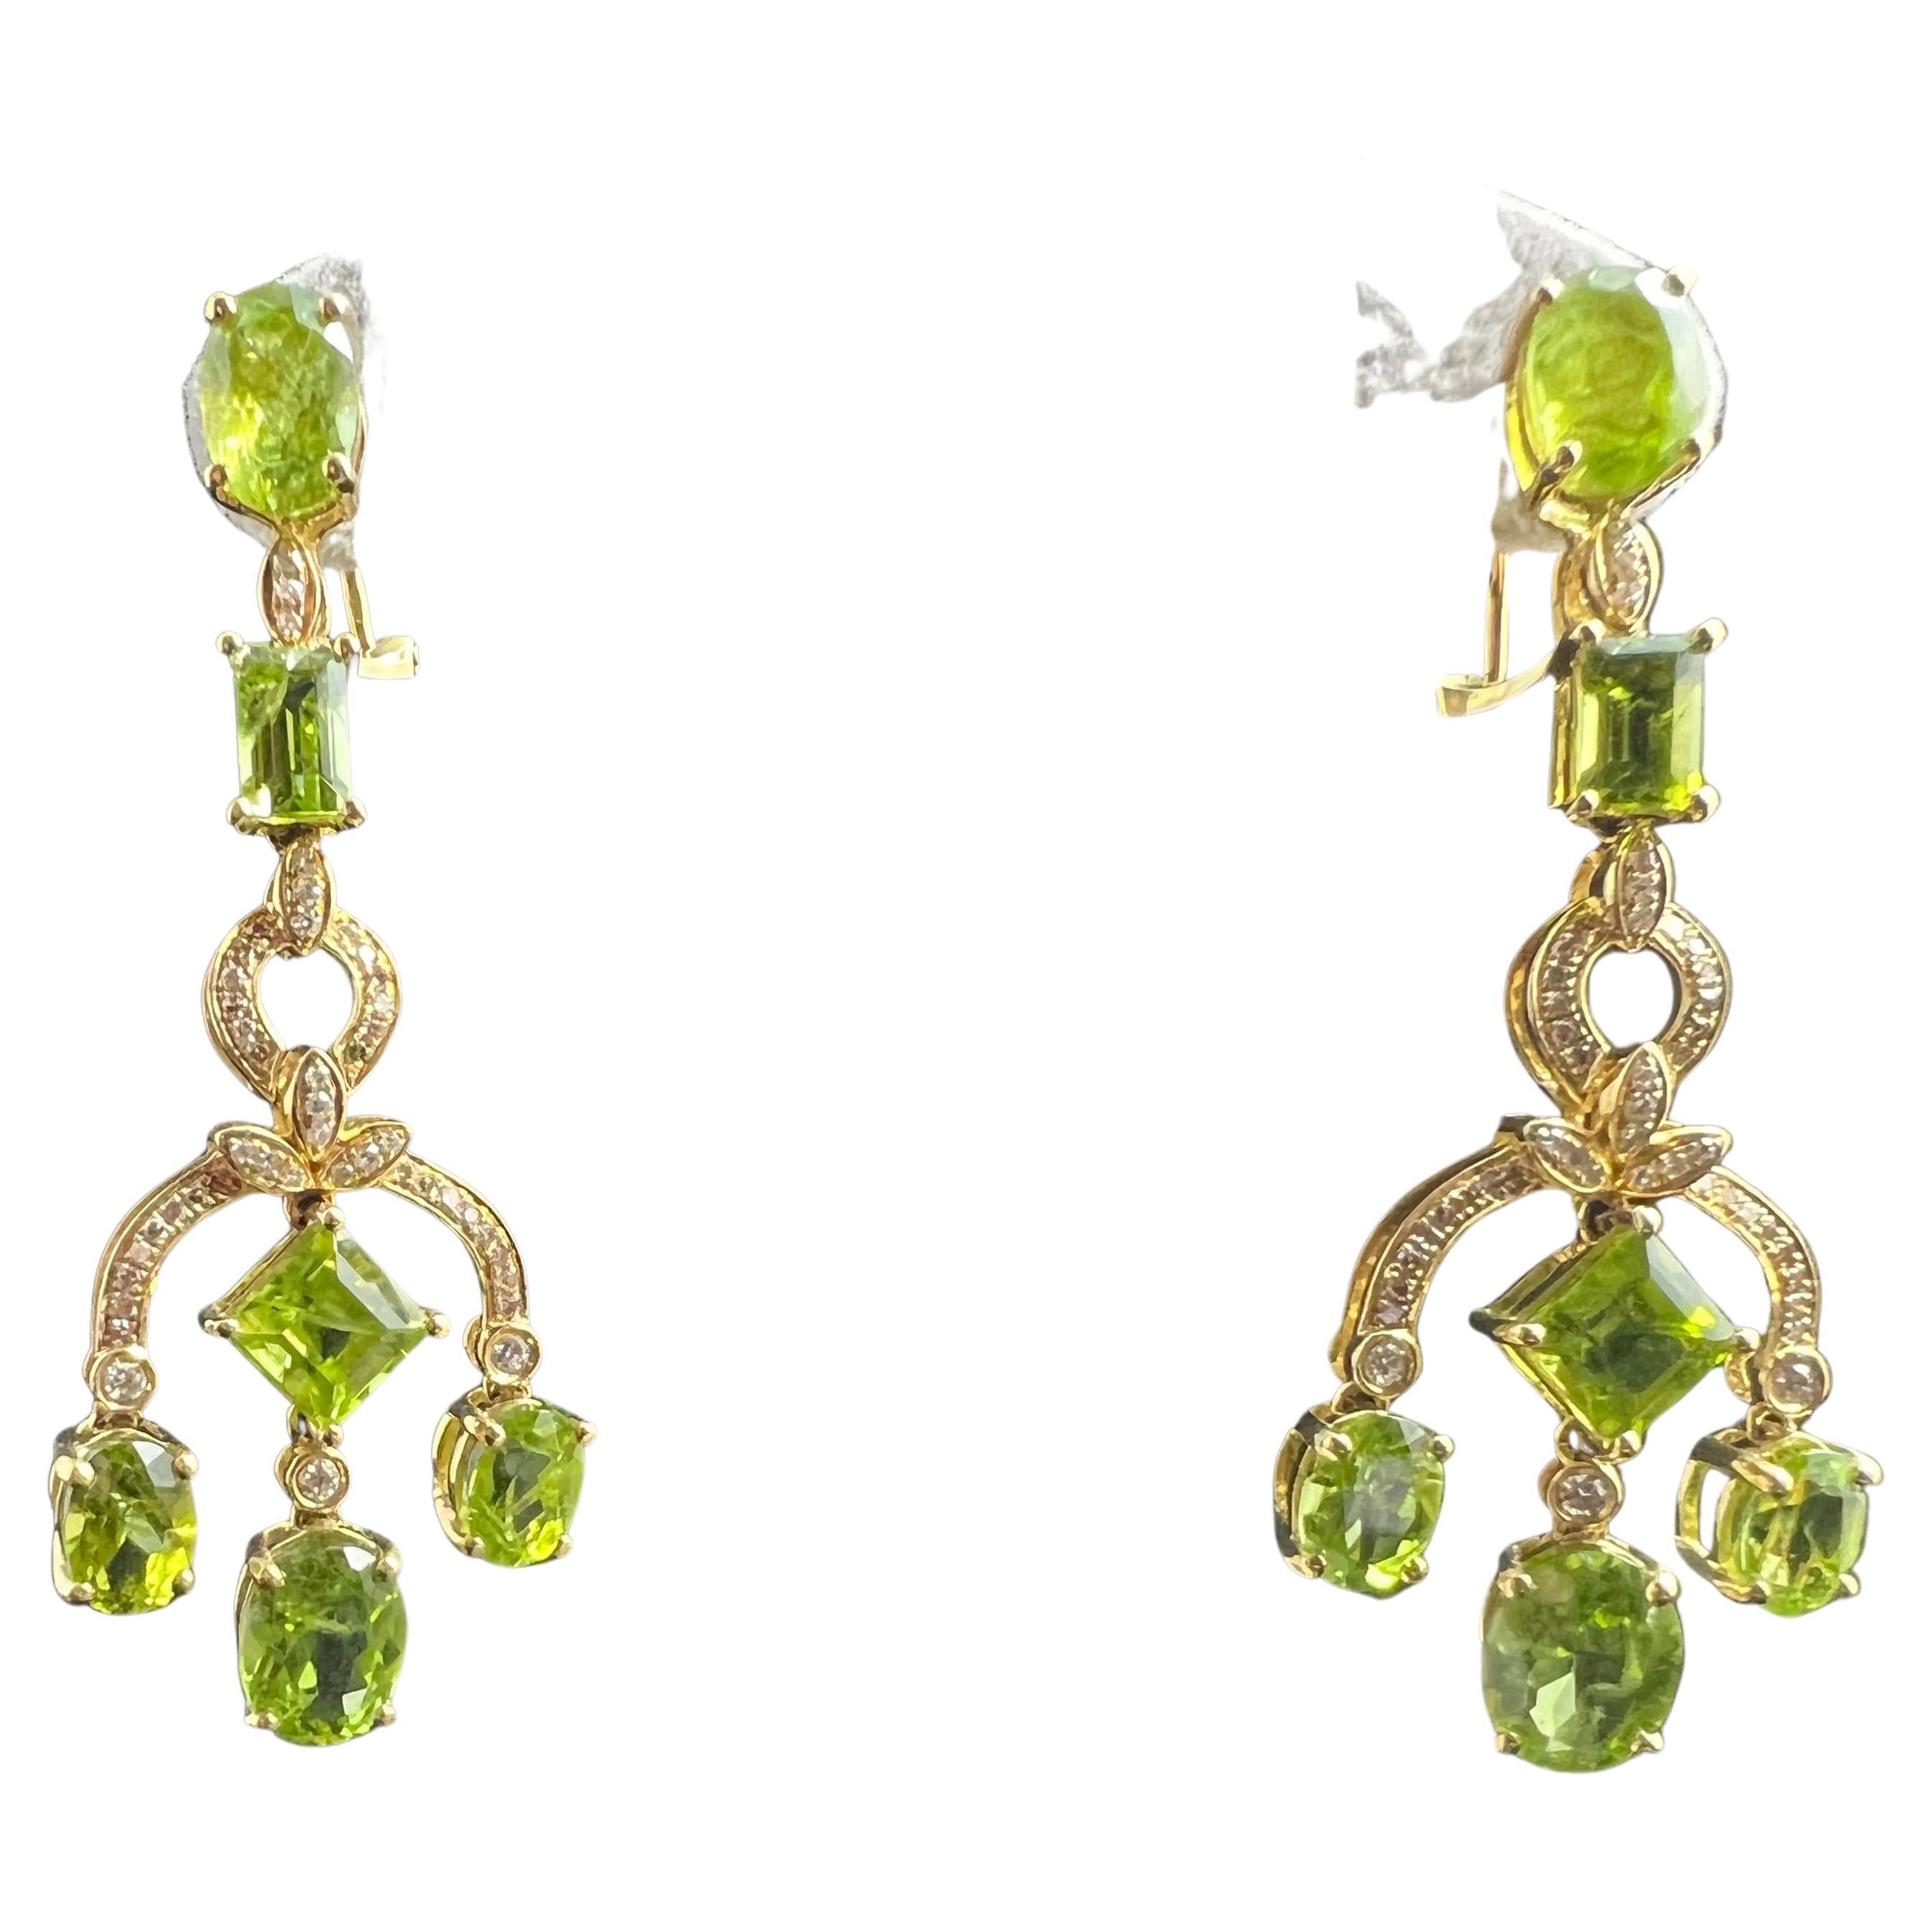 Pair of 18ct Yellow Gold Earrings Set with Peridots and Brilliants